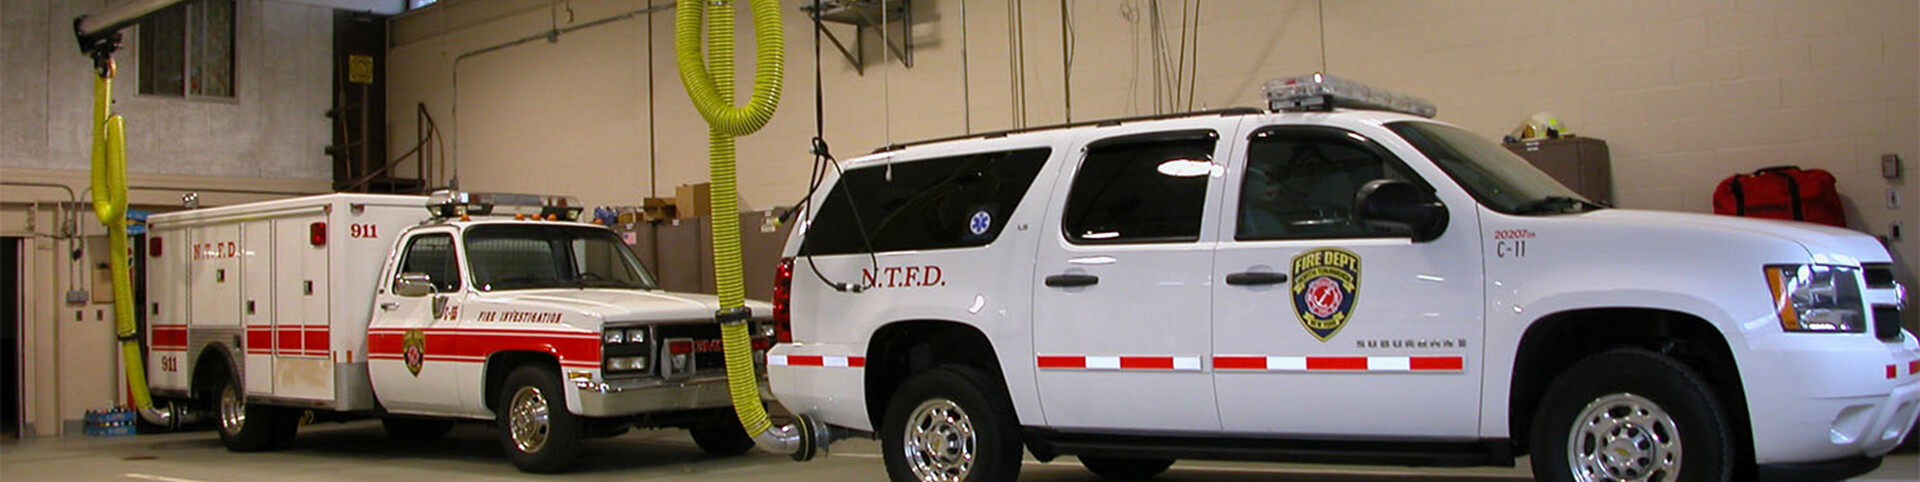 Vehicle exhaust extraction fire department